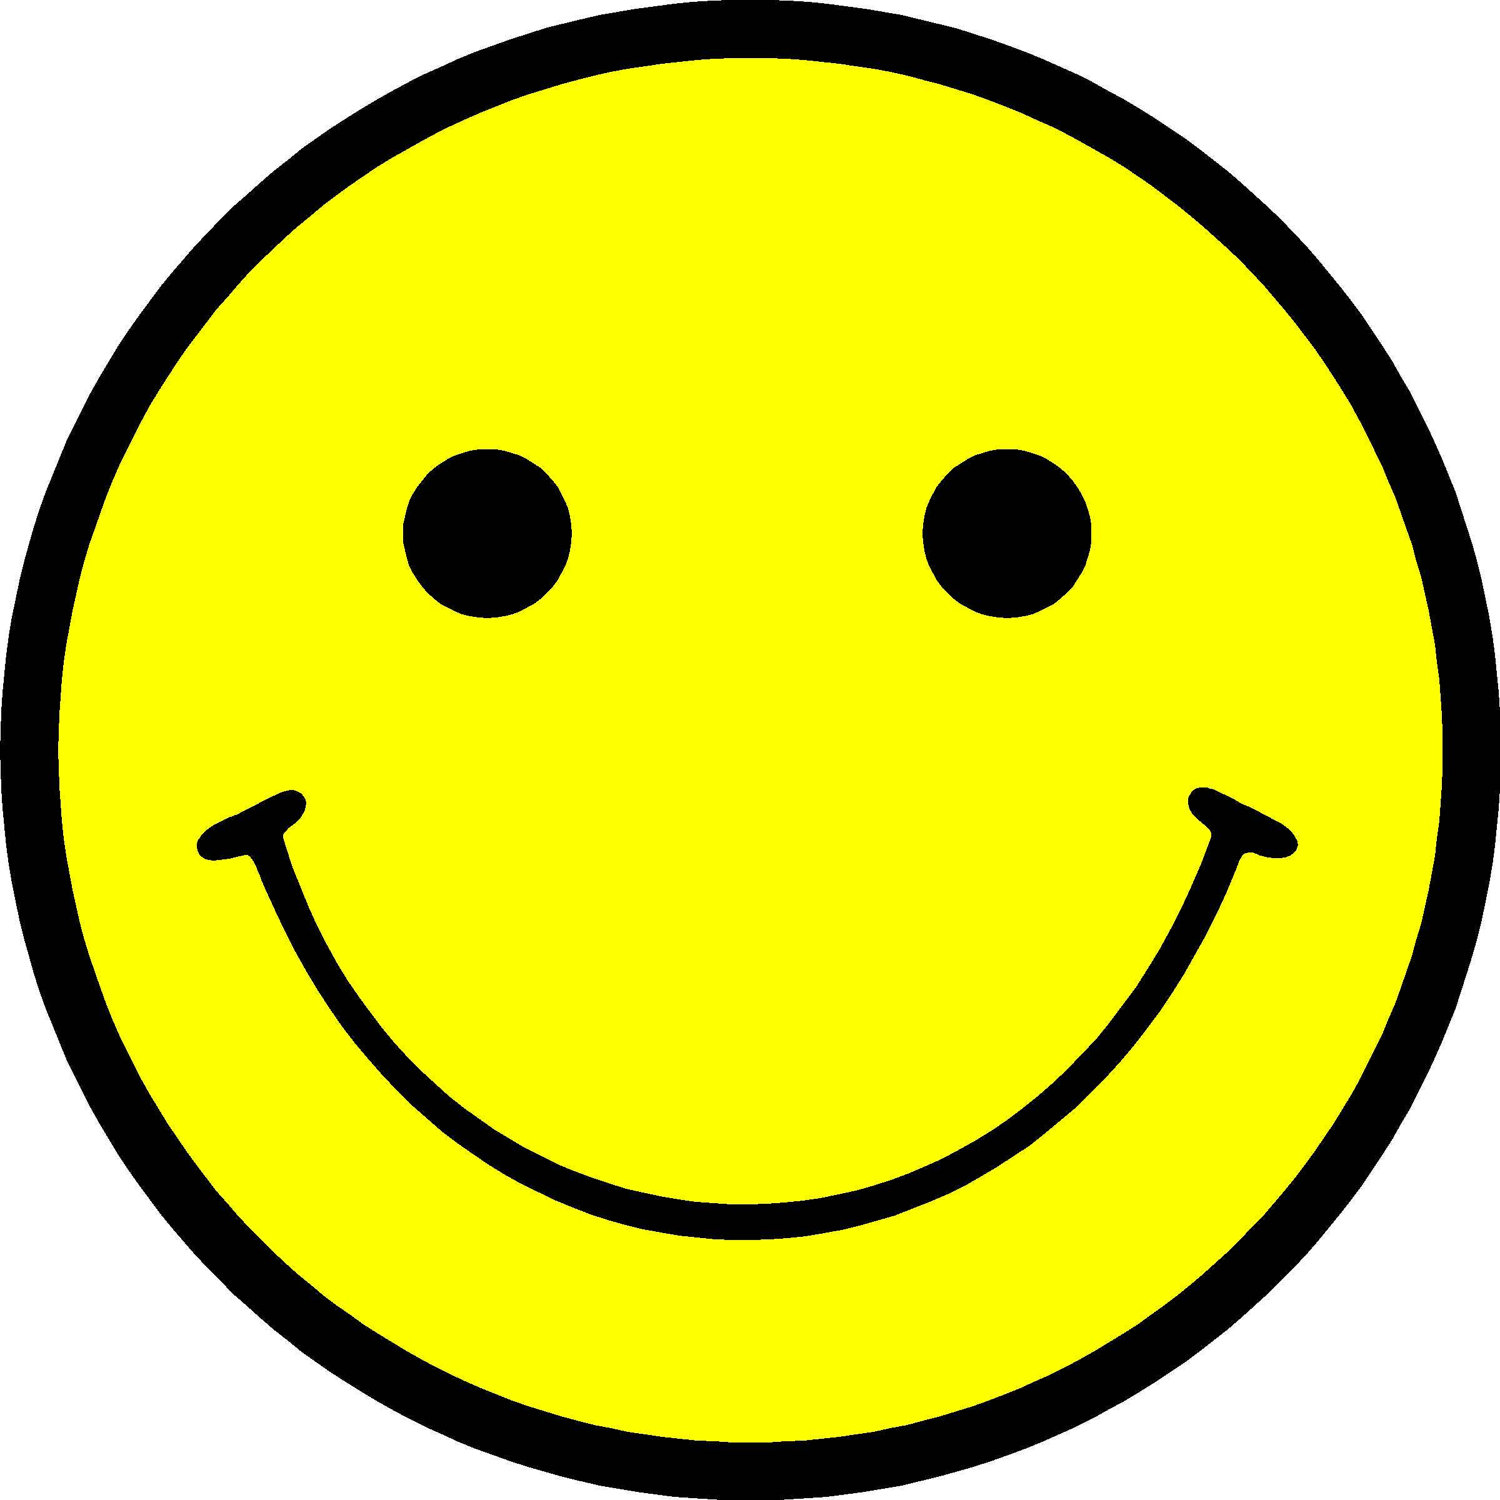 Picture Of A Happy Face - ClipArt Best